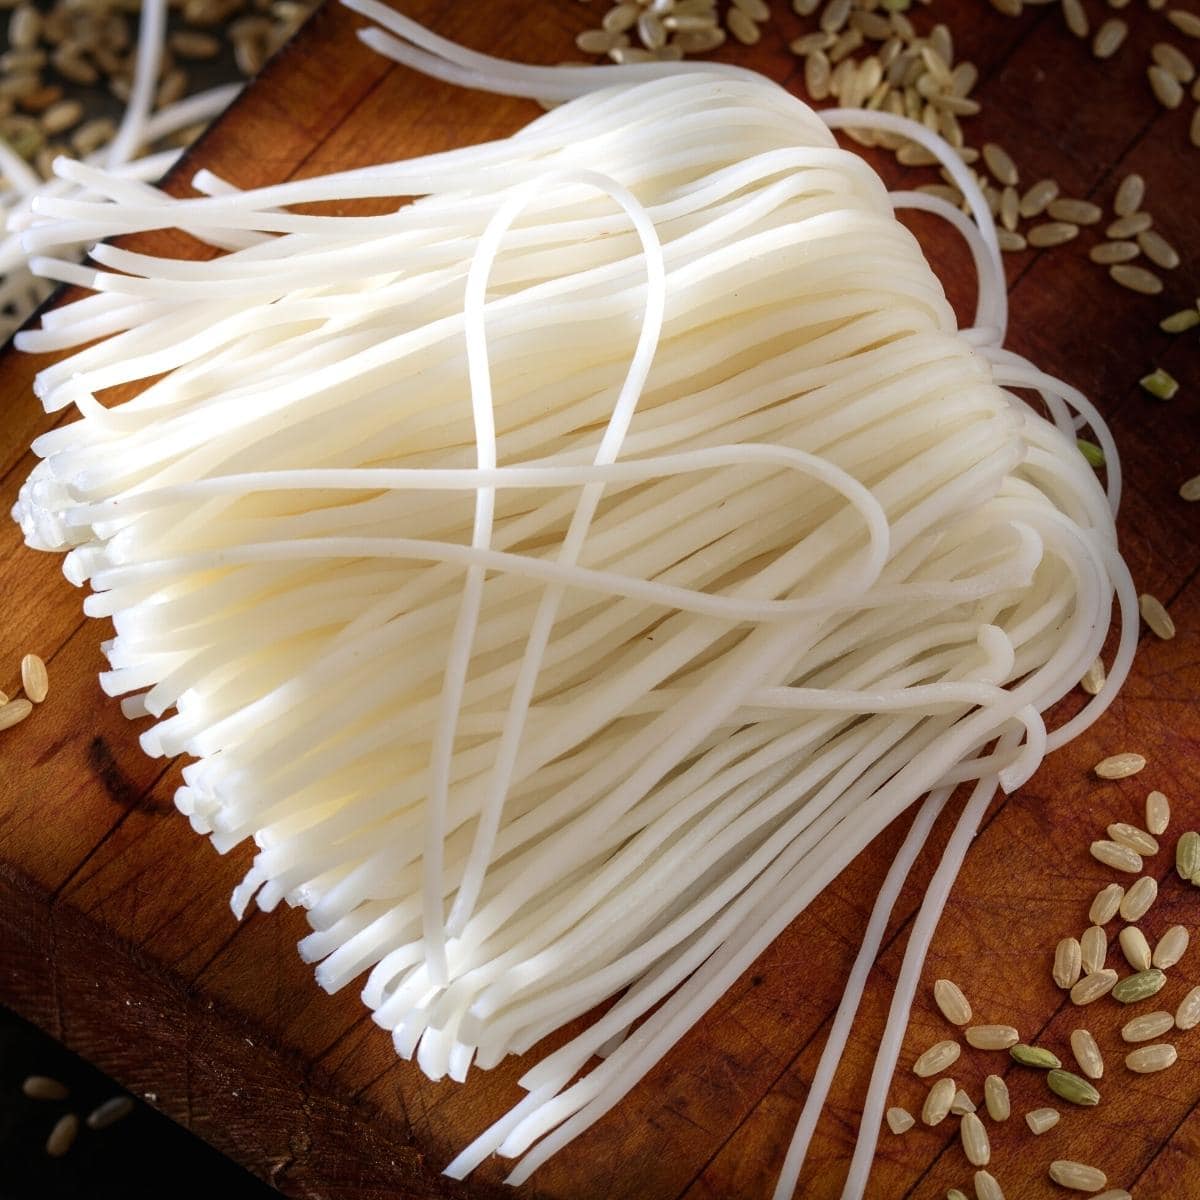 Dry white rice noodles resting on a wooden table.